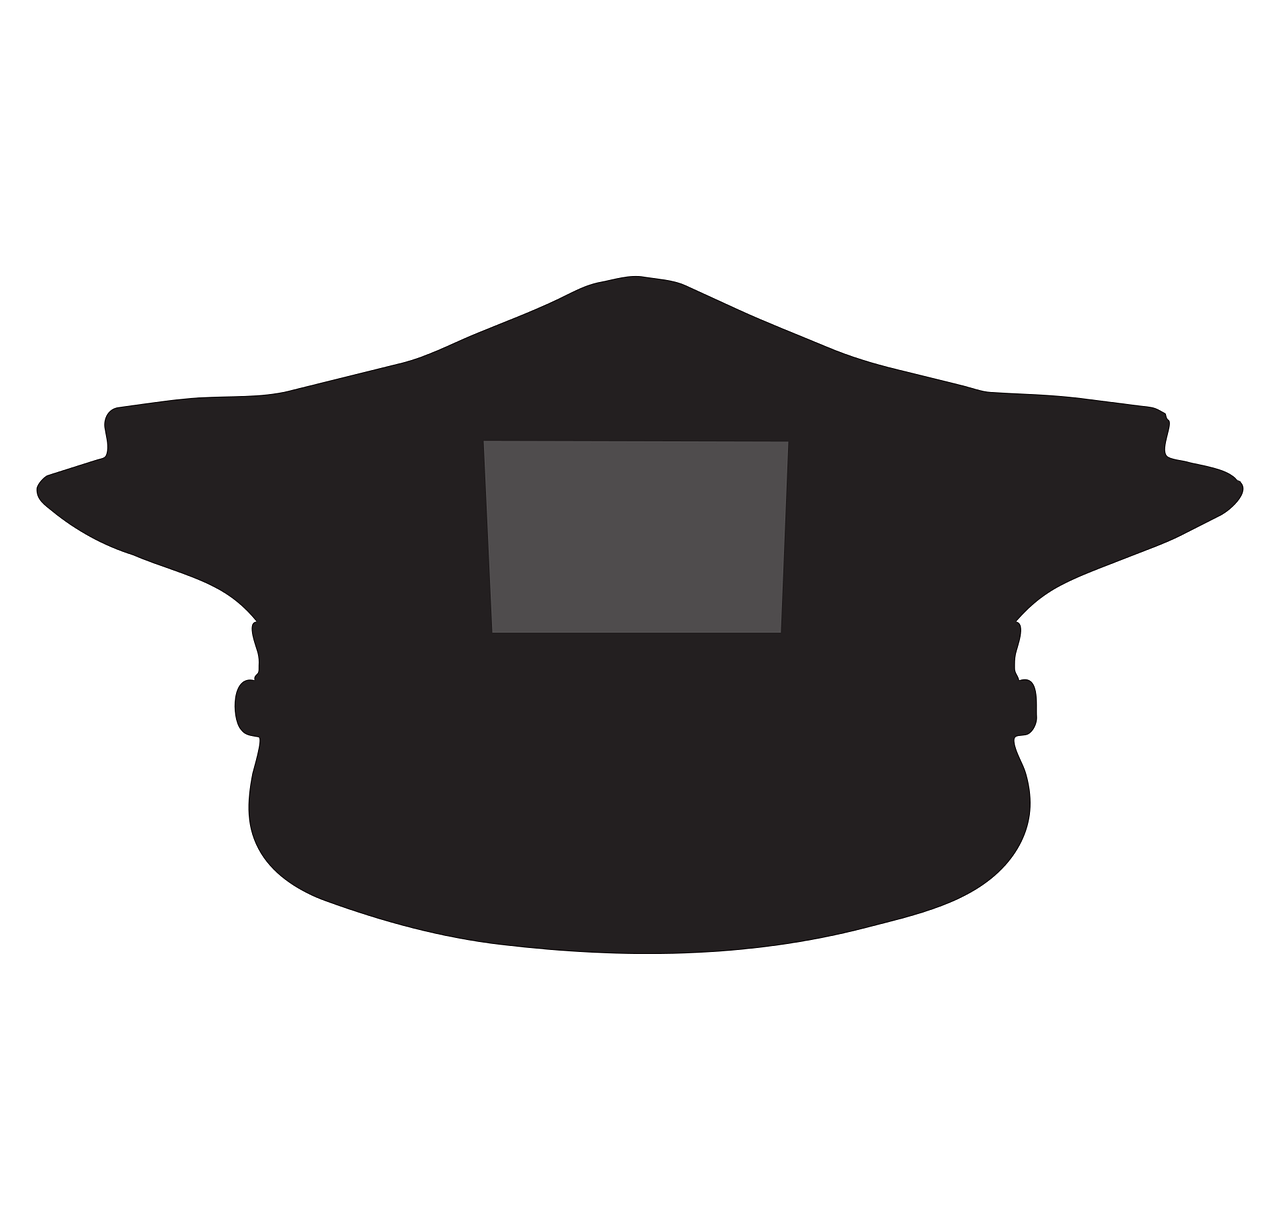 police hat silhouette free photo